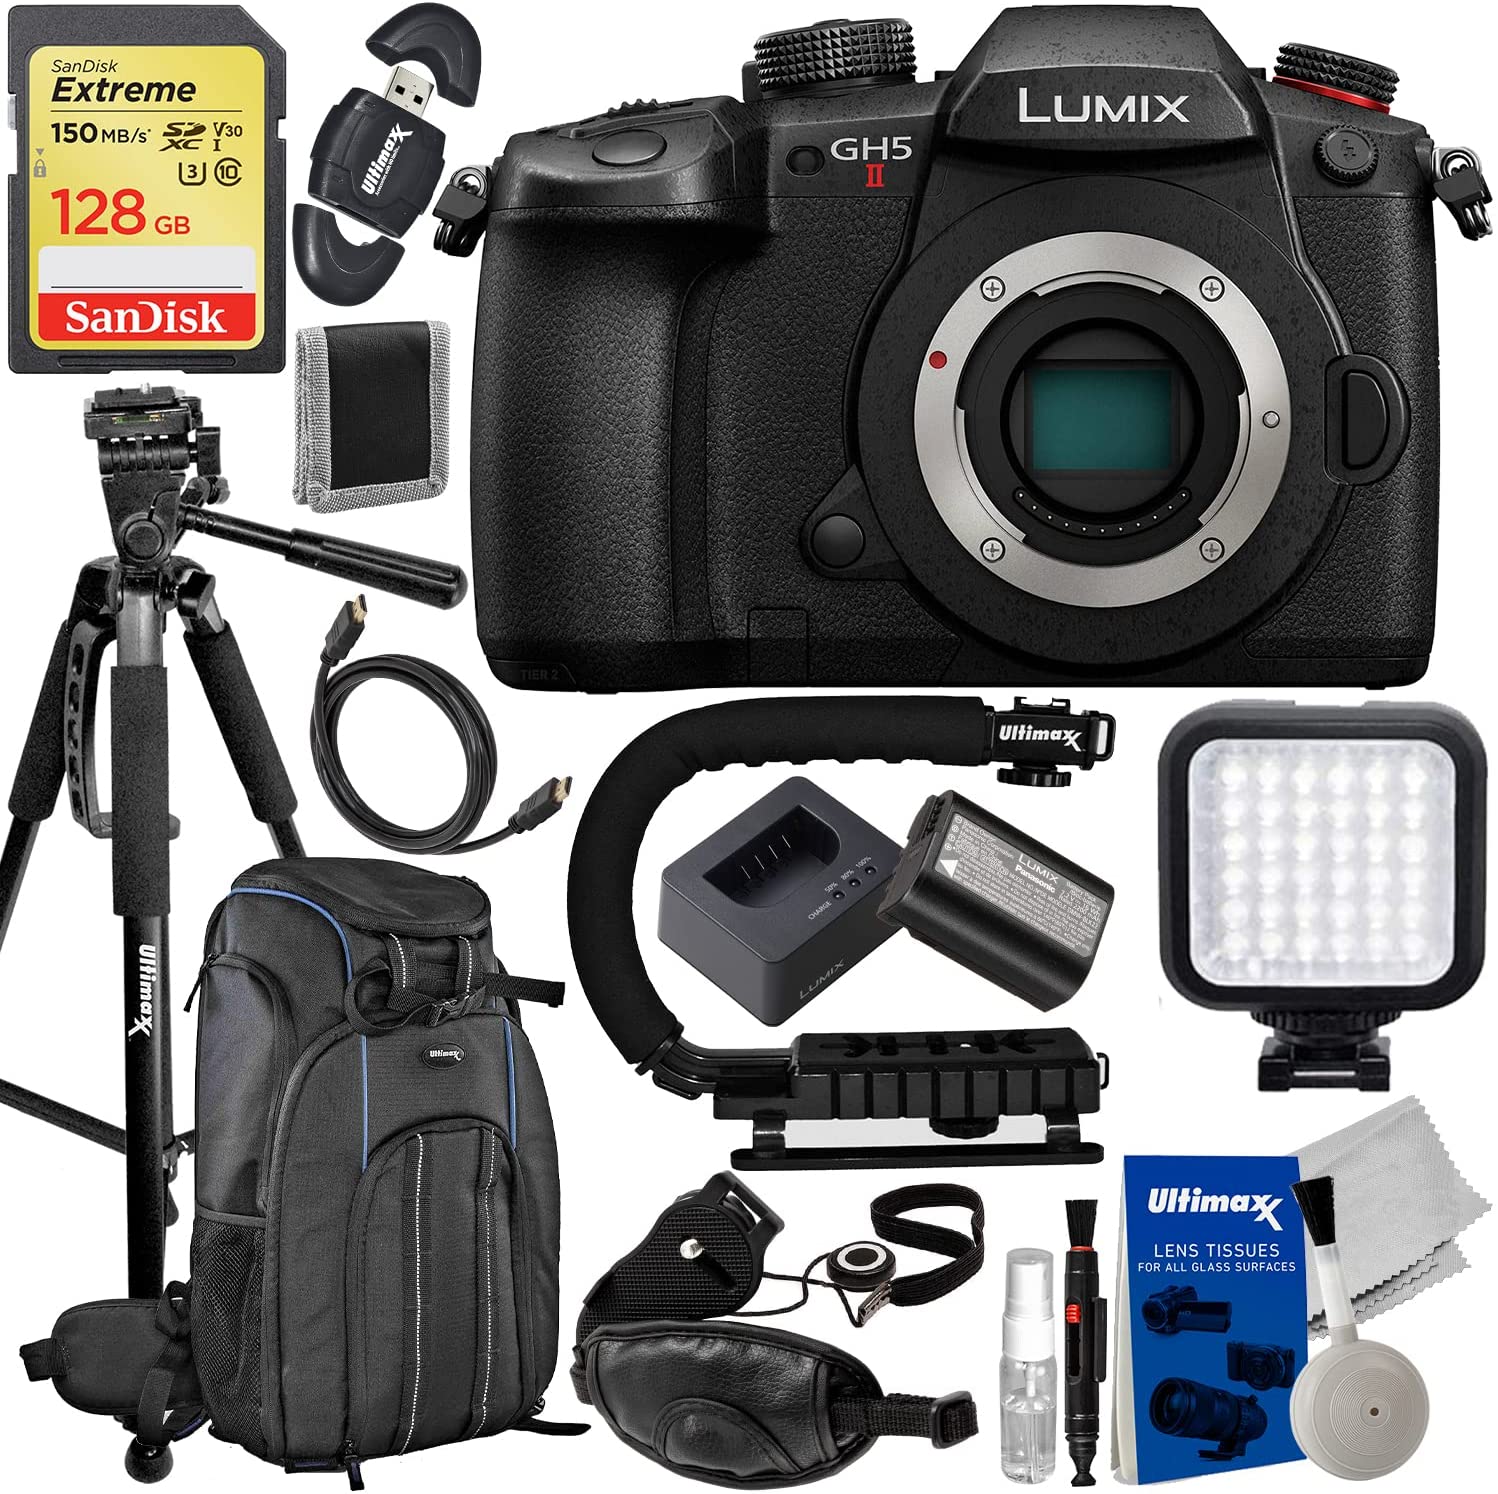 Panasonic Lumix GH5 II Mirrorless Camera (Body Only) + SanDisk 128GB Extreme SDXC, Deluxe Water-Resistant Camera Backpack, Lightweight 60” Tripod, Action Grip Stabilizer & Much More (22pc Bundle)